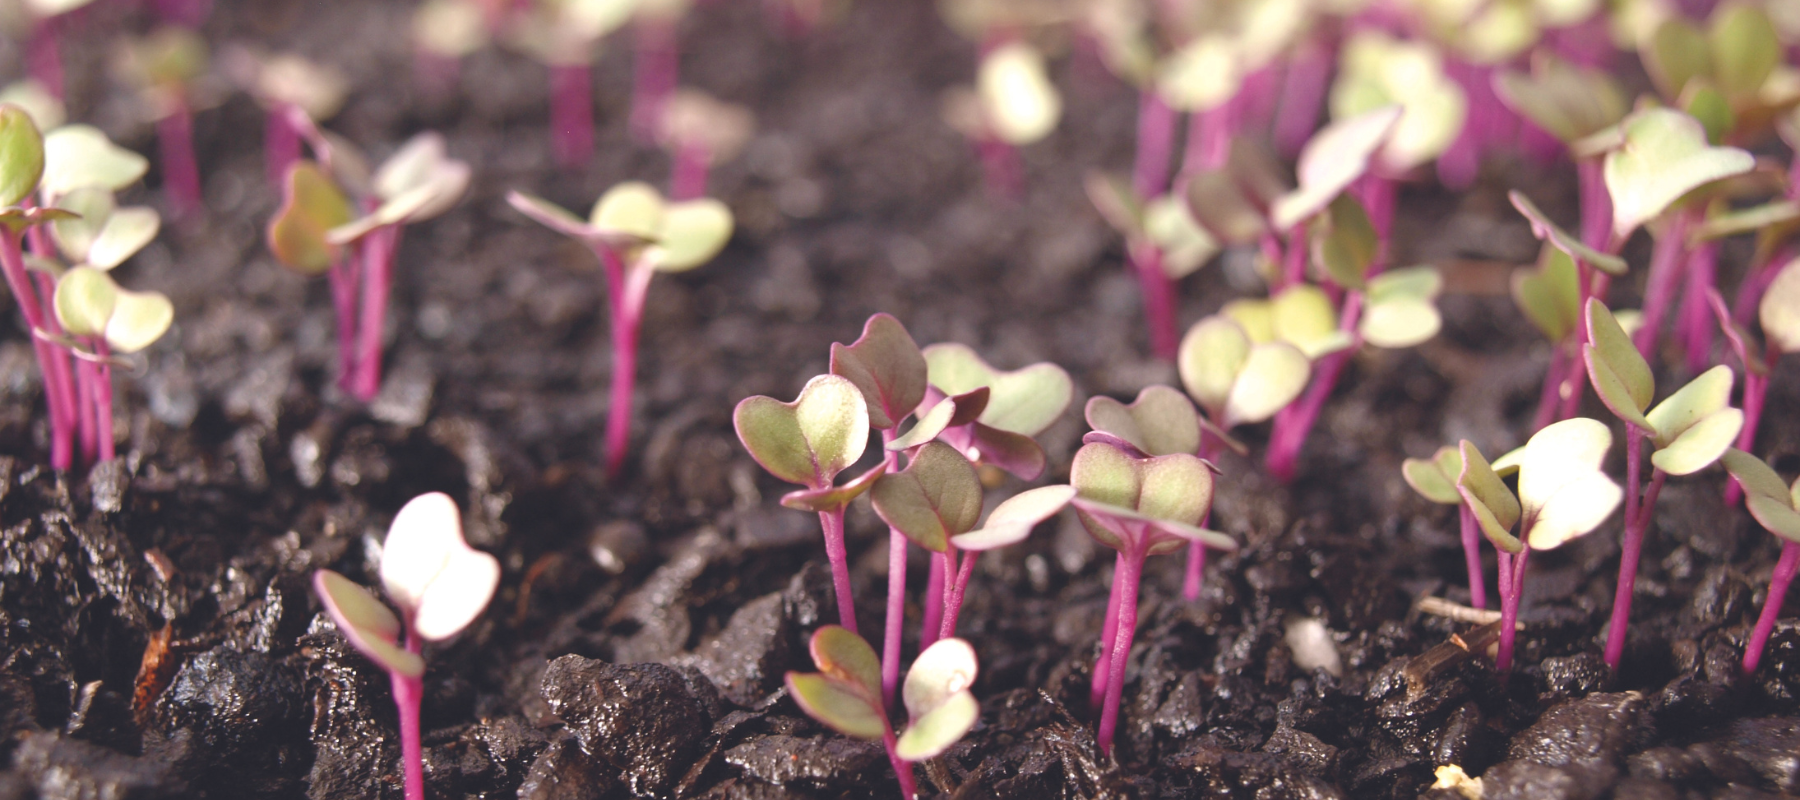 Common germination problems & how to fix them